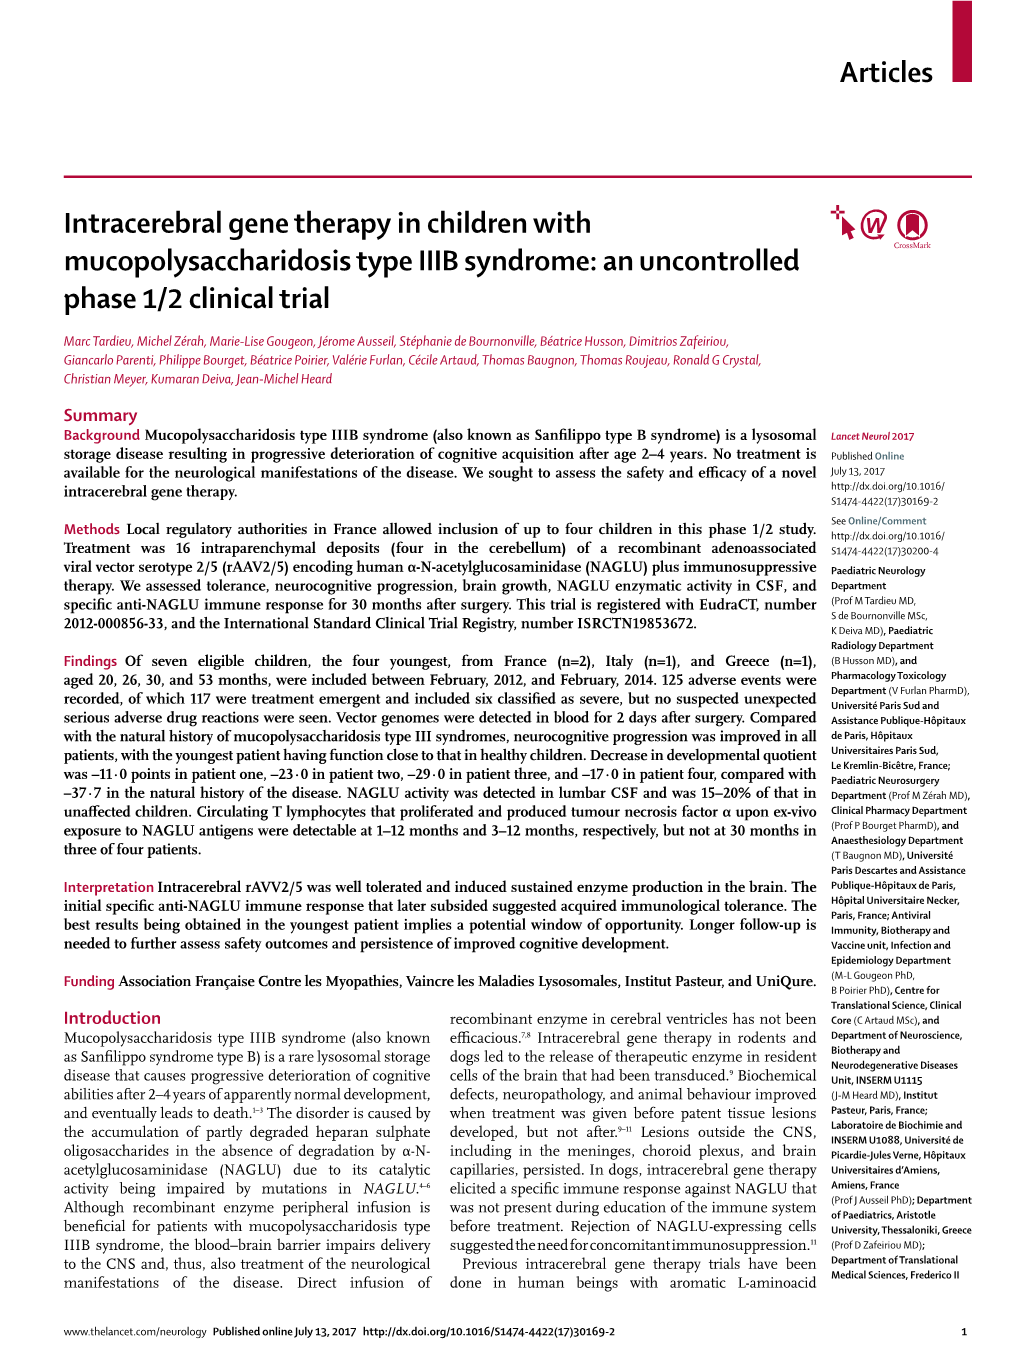 Intracerebral Gene Therapy in Children with Mucopolysaccharidosis Type IIIB Syndrome: an Uncontrolled Phase 1/2 Clinical Trial